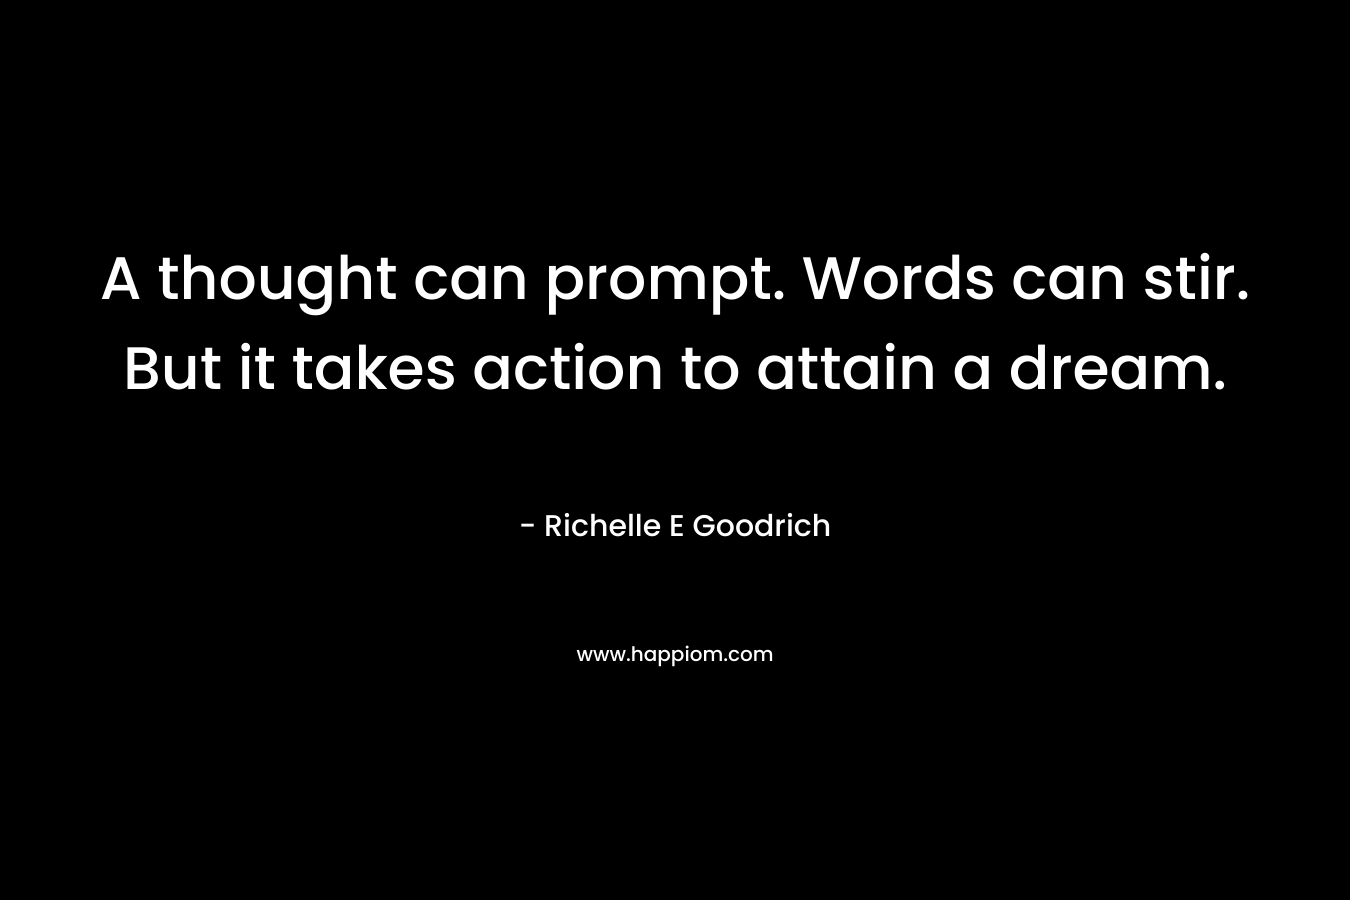 A thought can prompt. Words can stir. But it takes action to attain a dream.